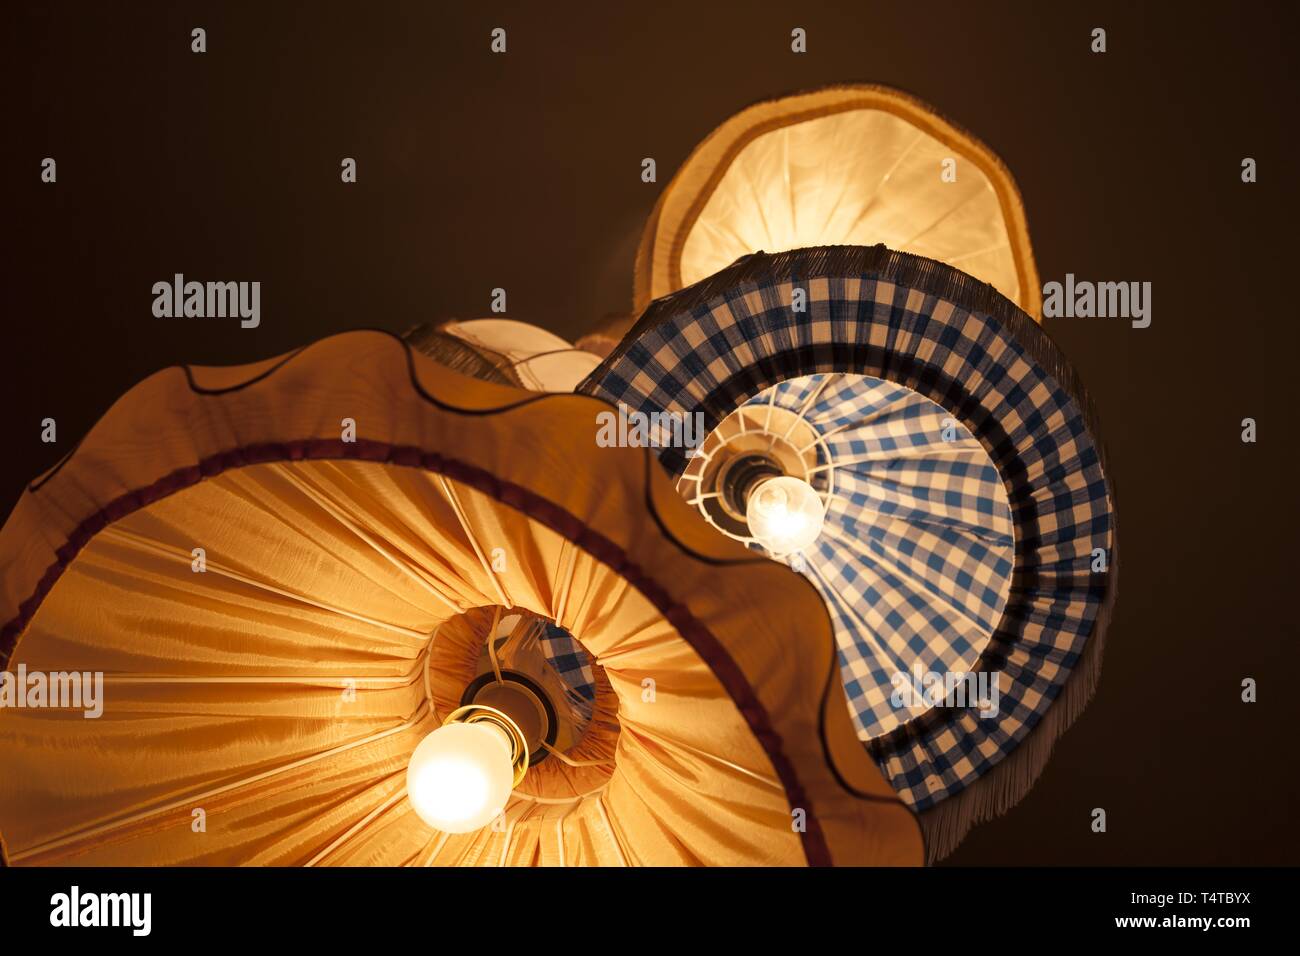 Ceiling lights Stock Photo